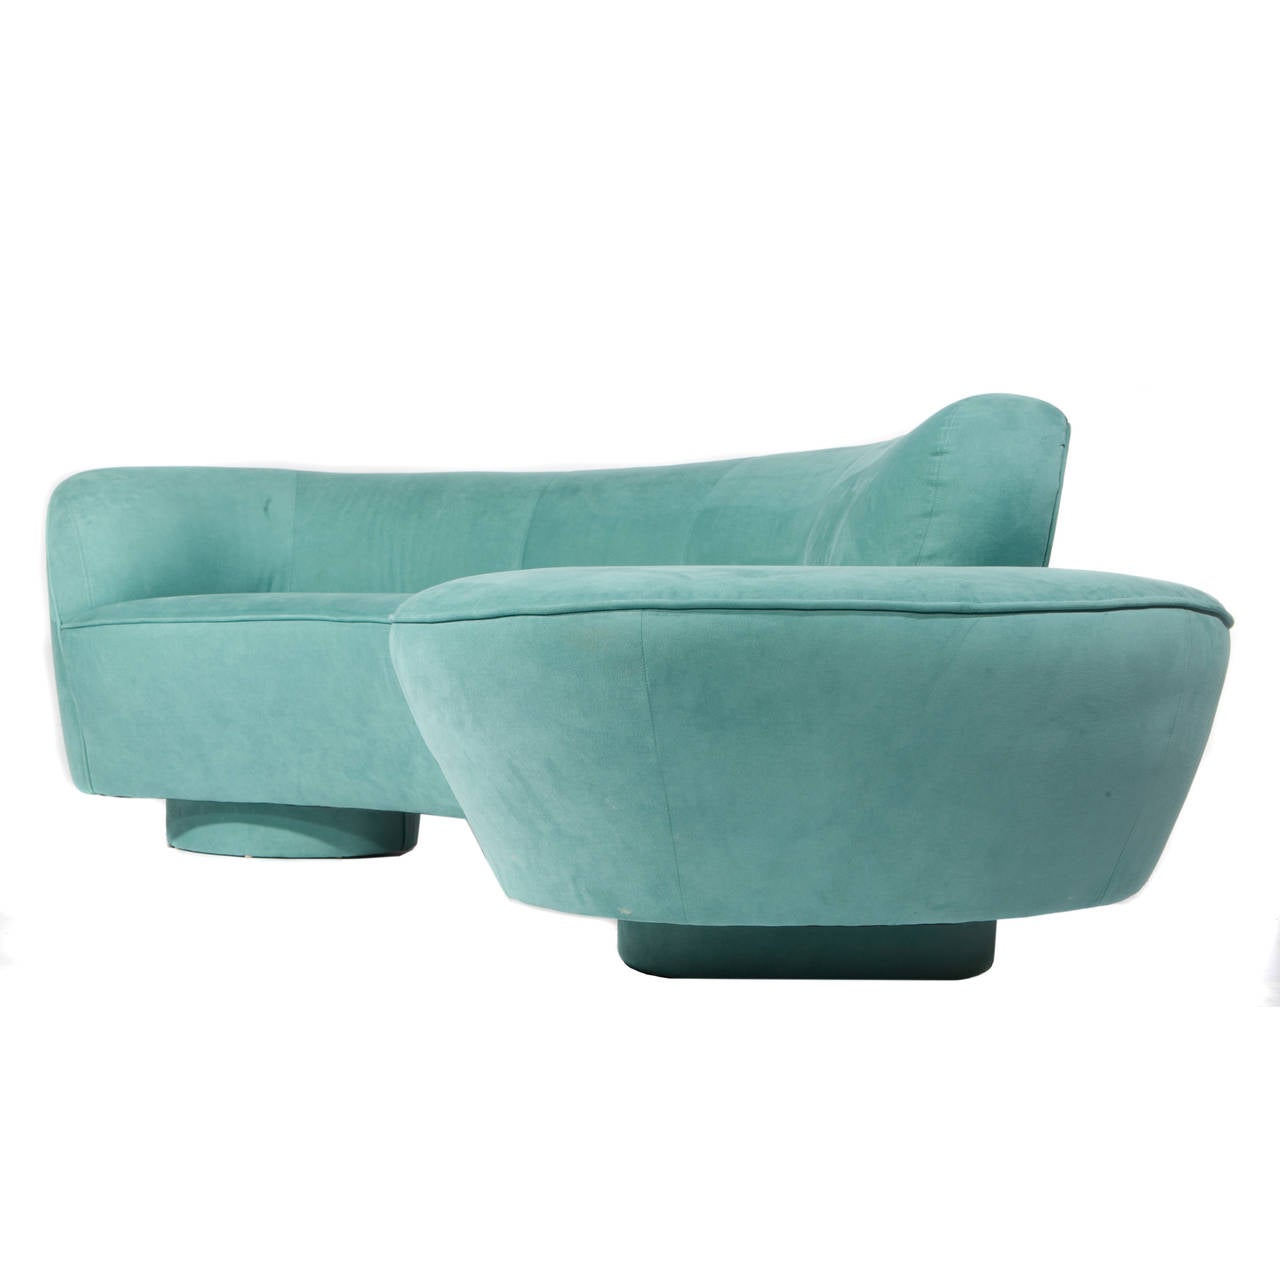 Classic Kagan sculptural design. The sofa rests on two round, upholstered discs with extra support provided by a center lucite slab. Original teal microsuede upholstery with Directional tag on underside. This item is in our Bronx warehouse; please